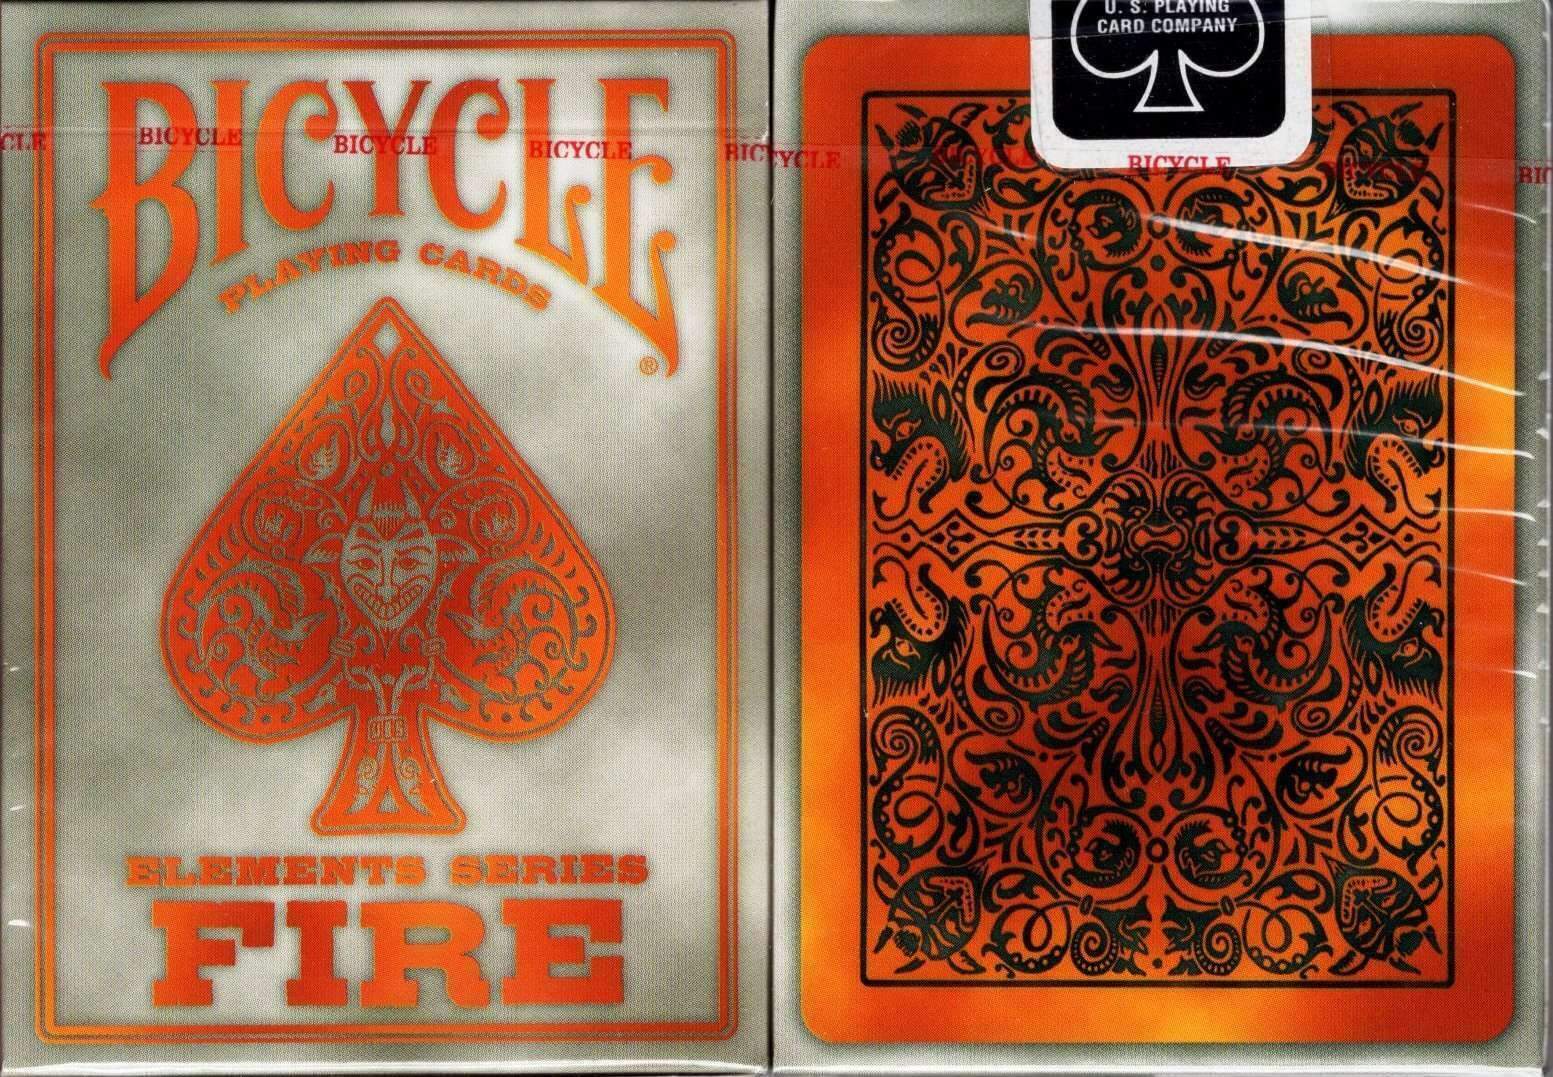 Elements Series - Fire - Smoke Edition [Bicycle] - Playing Cards - New - USPCC